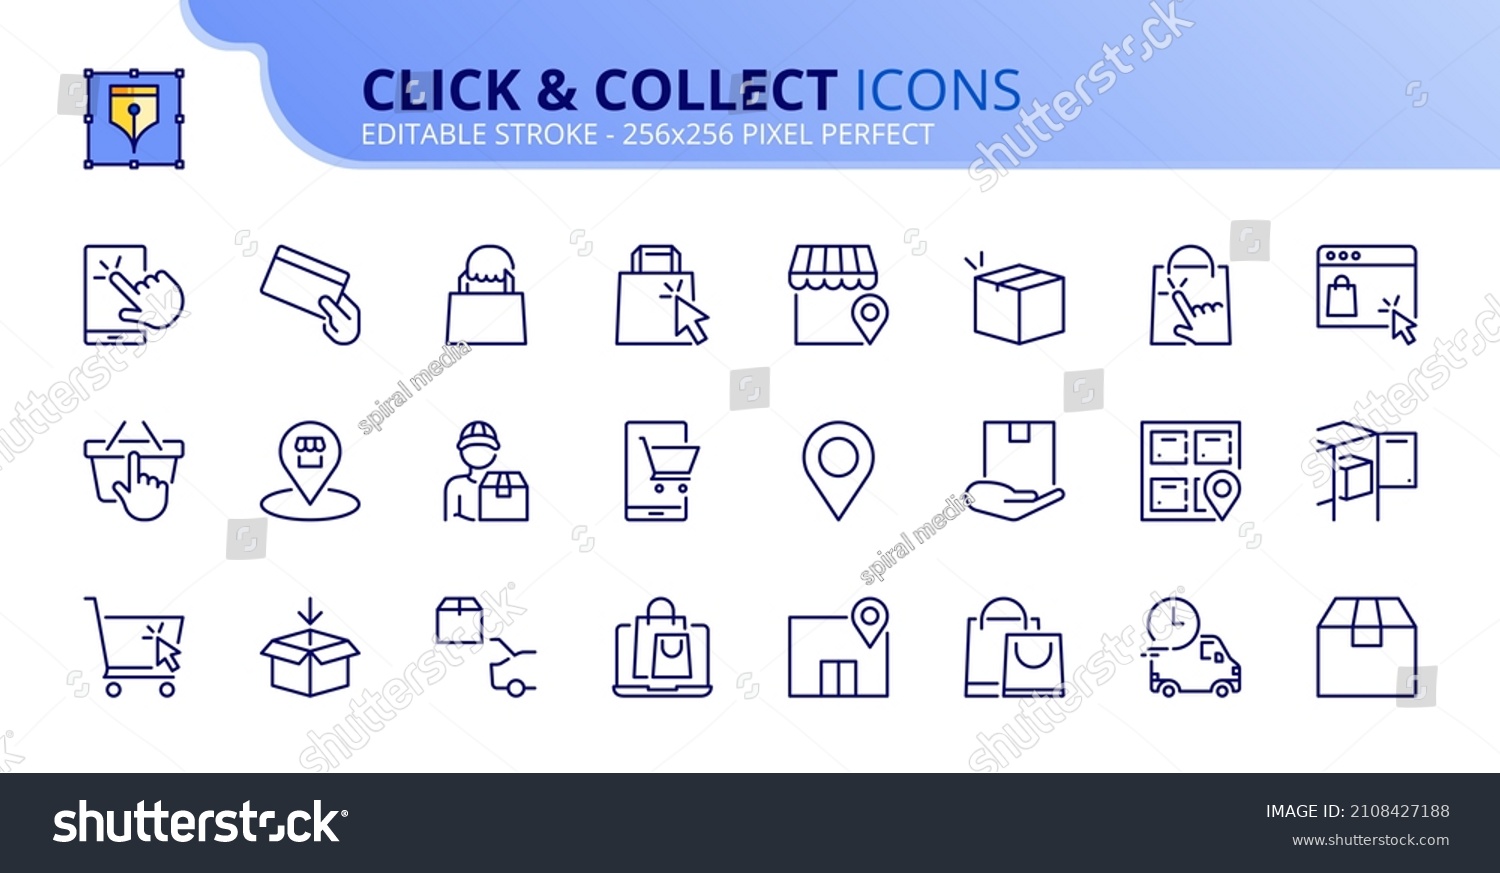 Outline icons about click and collect. Contains such icons as shopping, buy online, select location, store, locker, collect and pick up. Editable stroke Vector 256x256 pixel perfect #2108427188